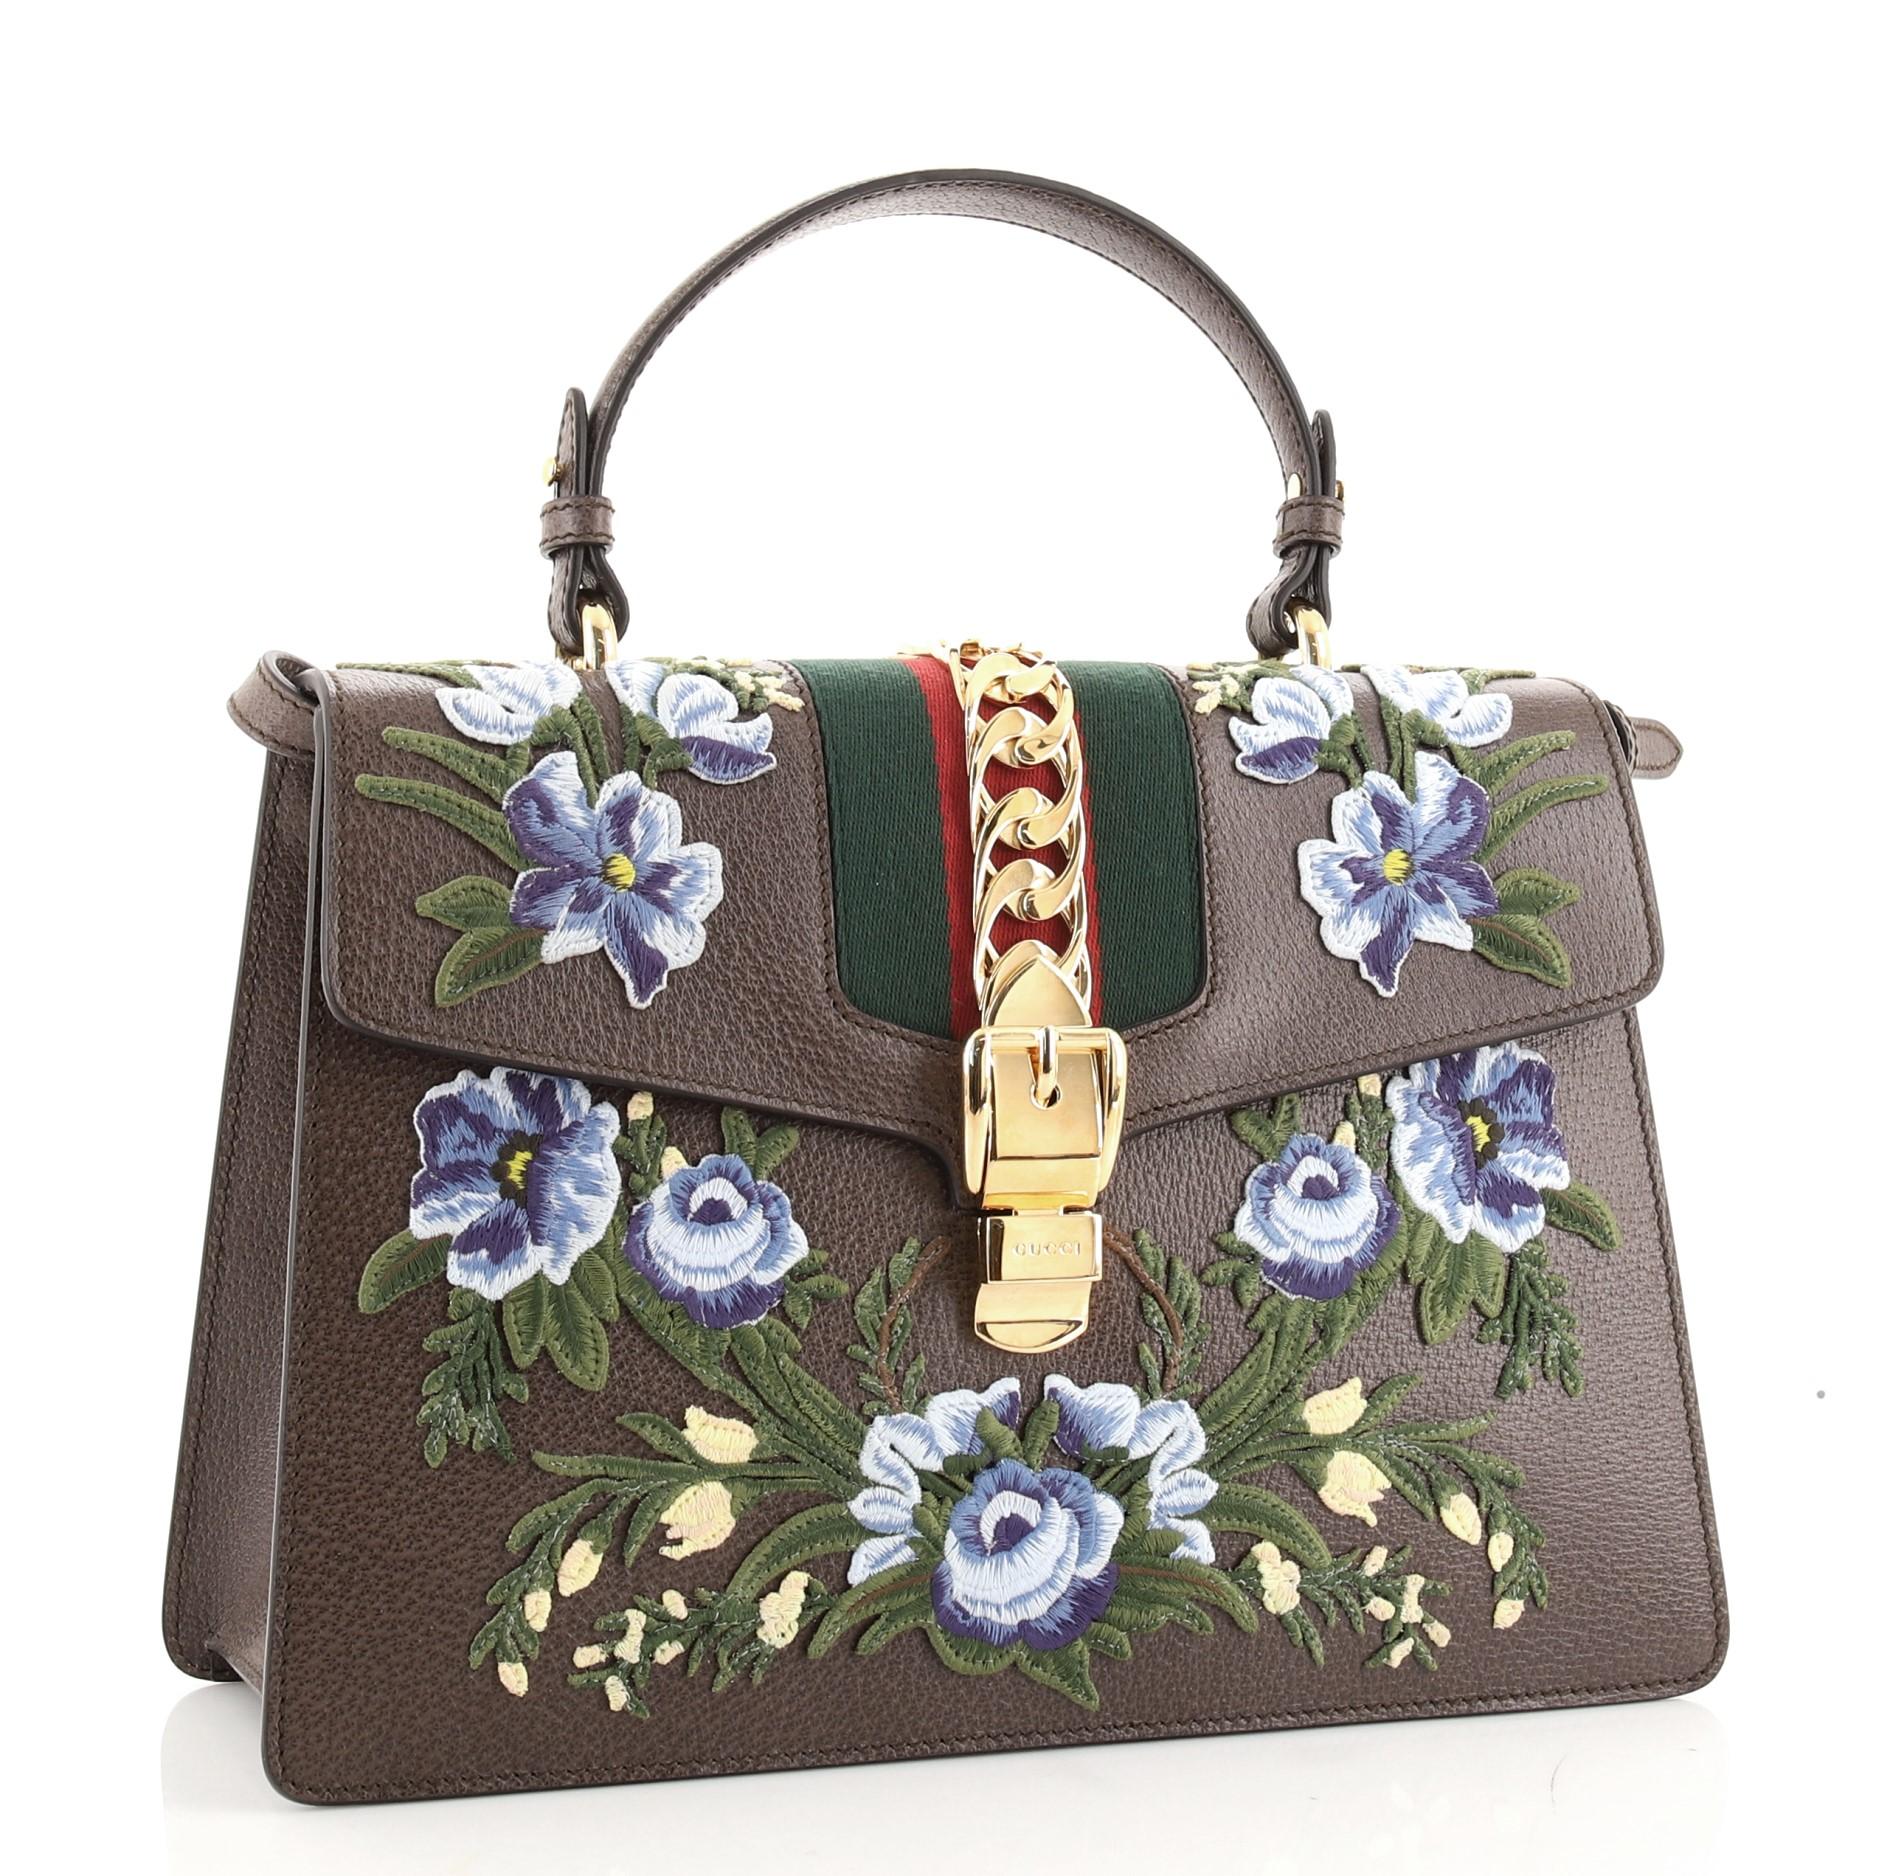 gucci sylvie embroidered bag